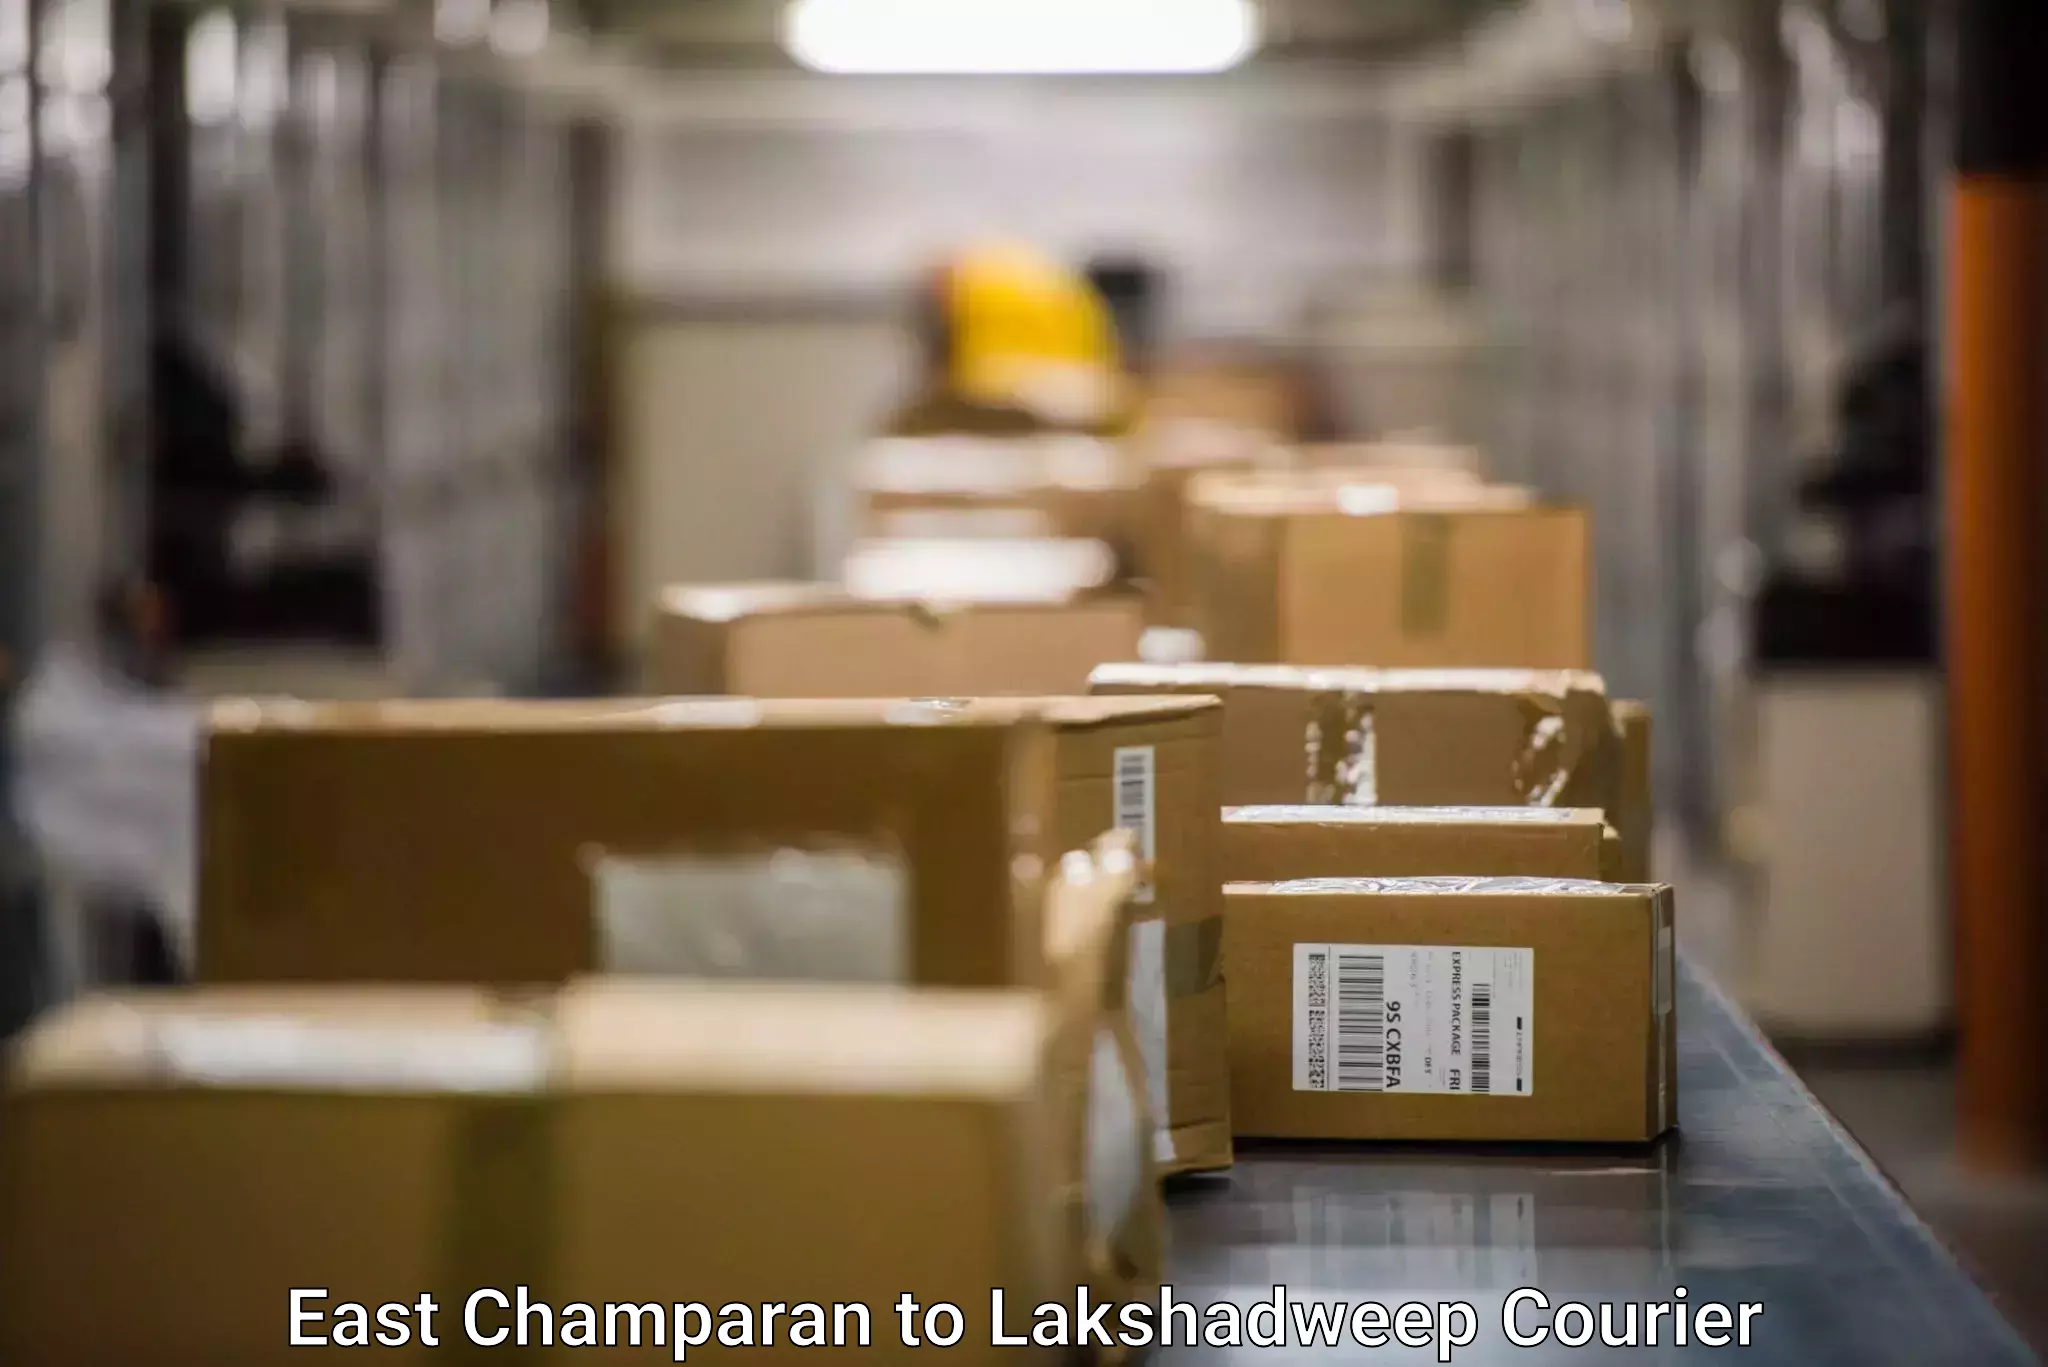 High-priority parcel service East Champaran to Lakshadweep